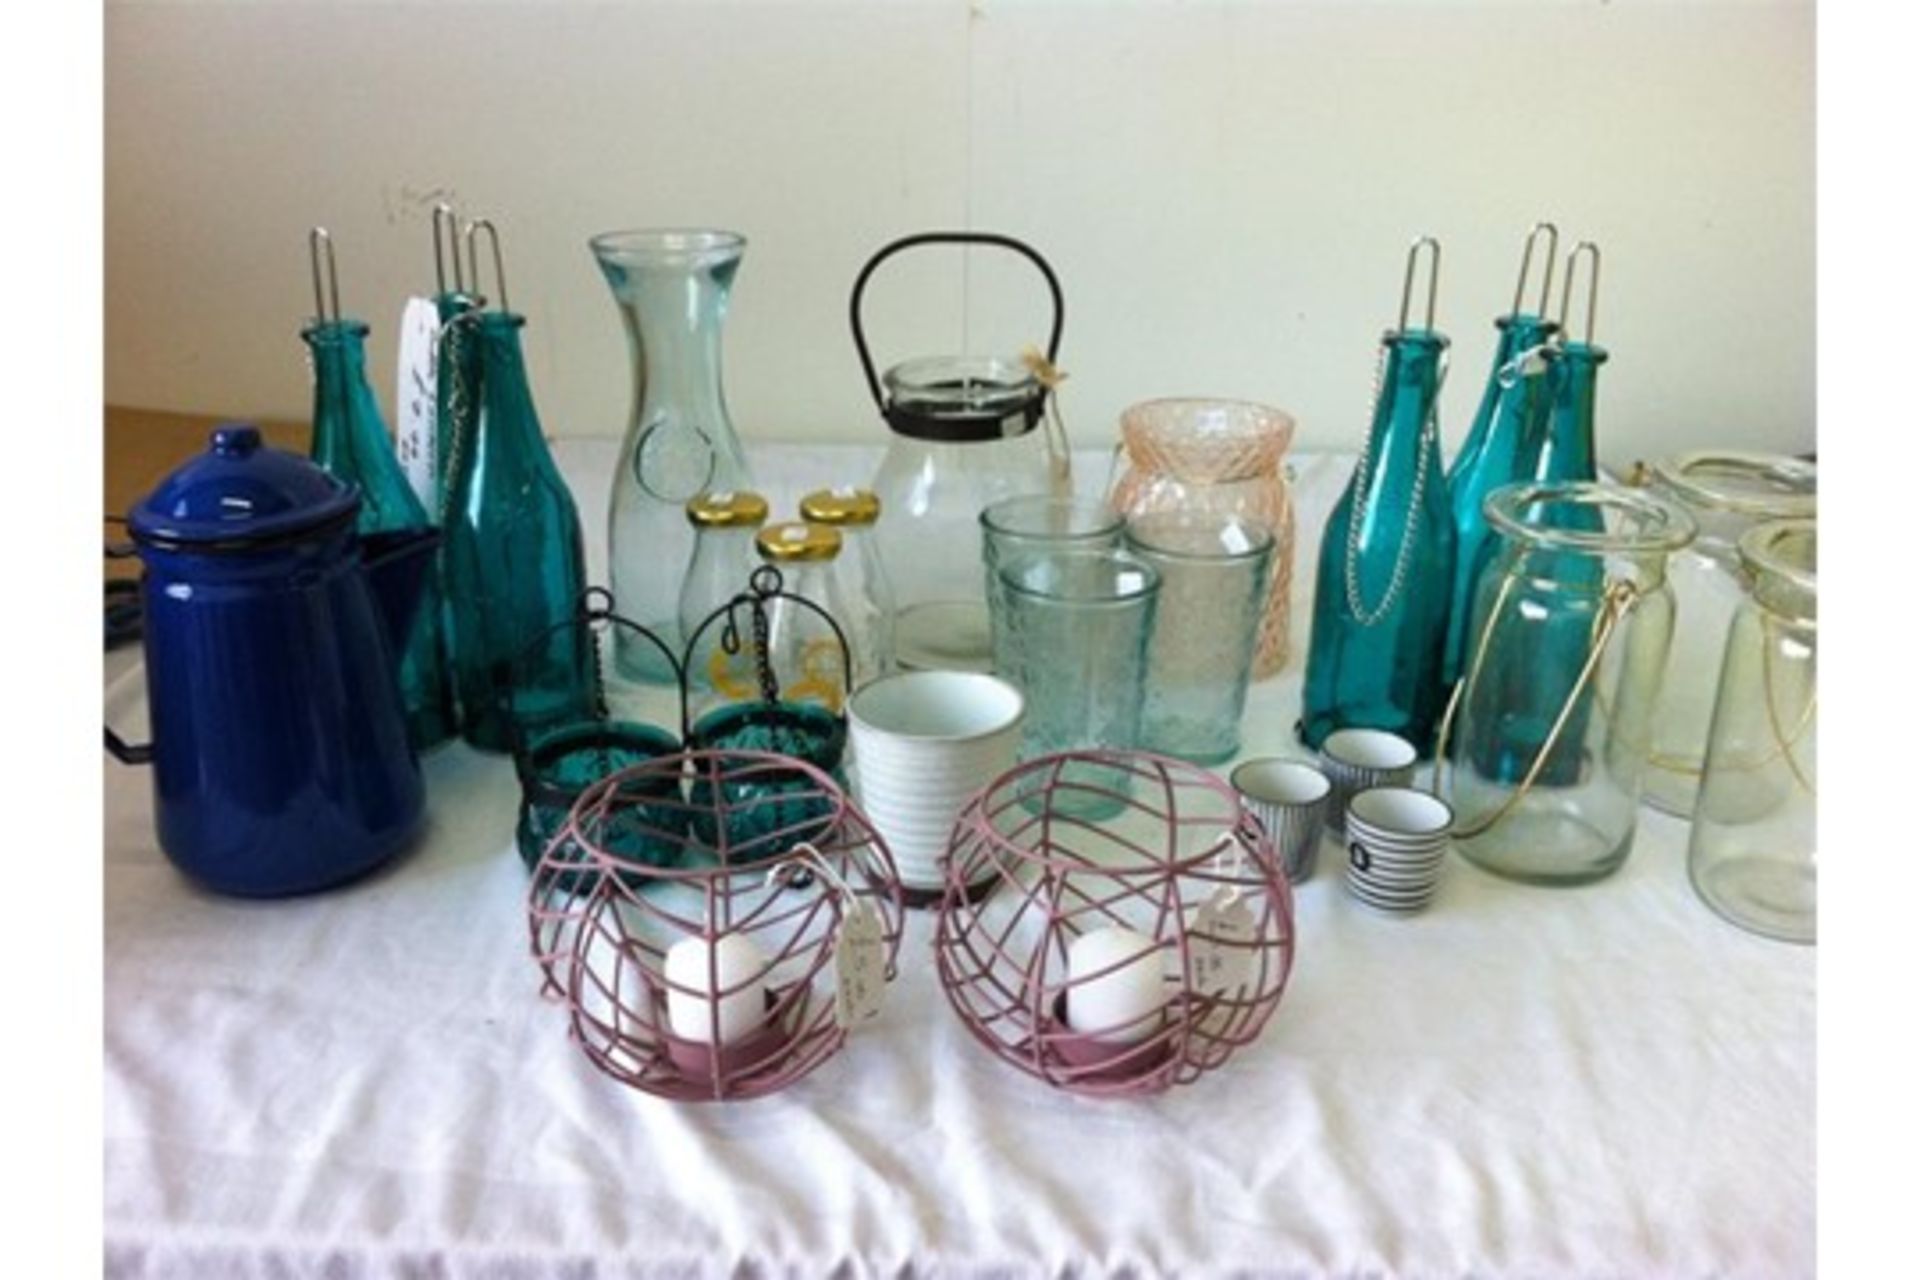 Approximately 35 glass/cage/bottle style tealight/candle holders, Large glass cake dome, 4 x glass c - Image 2 of 3